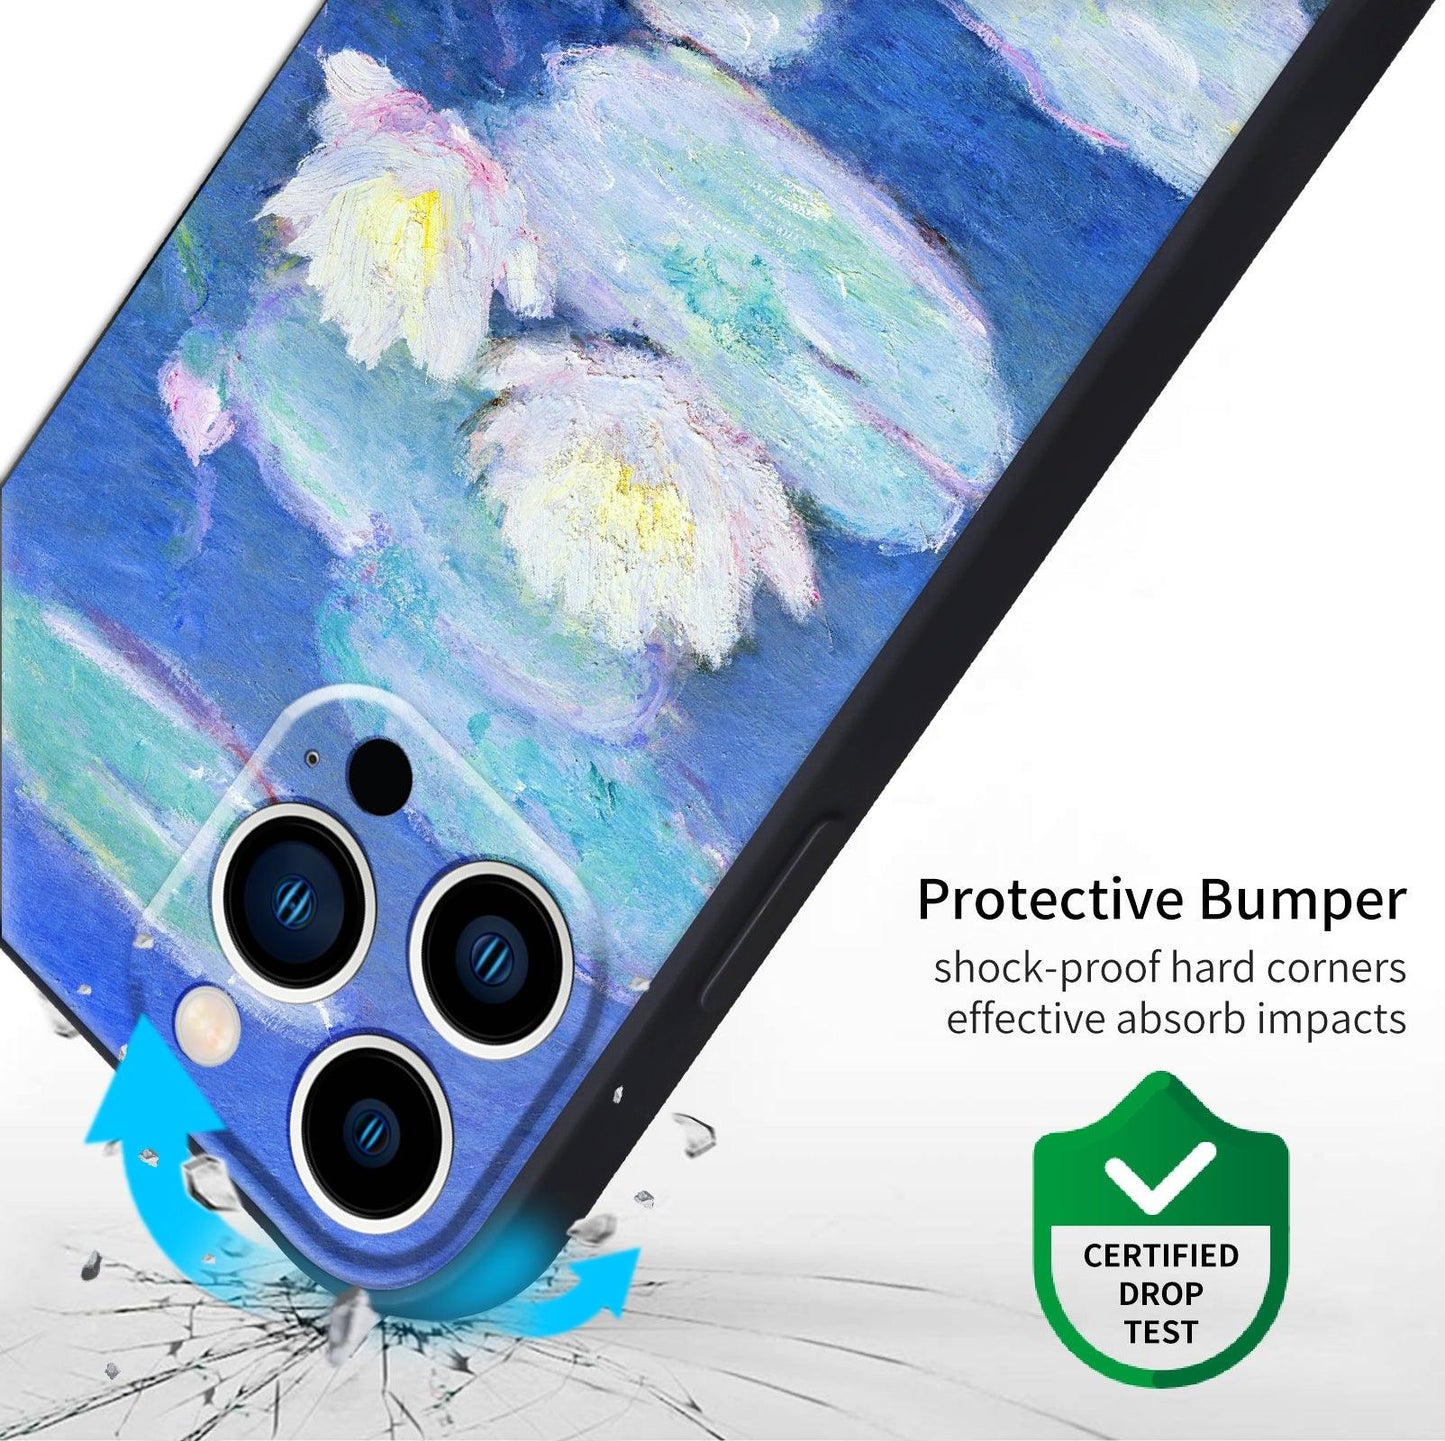 iPhone 13 Pro Silicone Case(Water Lilies by Claude Monet) - Berkin Arts